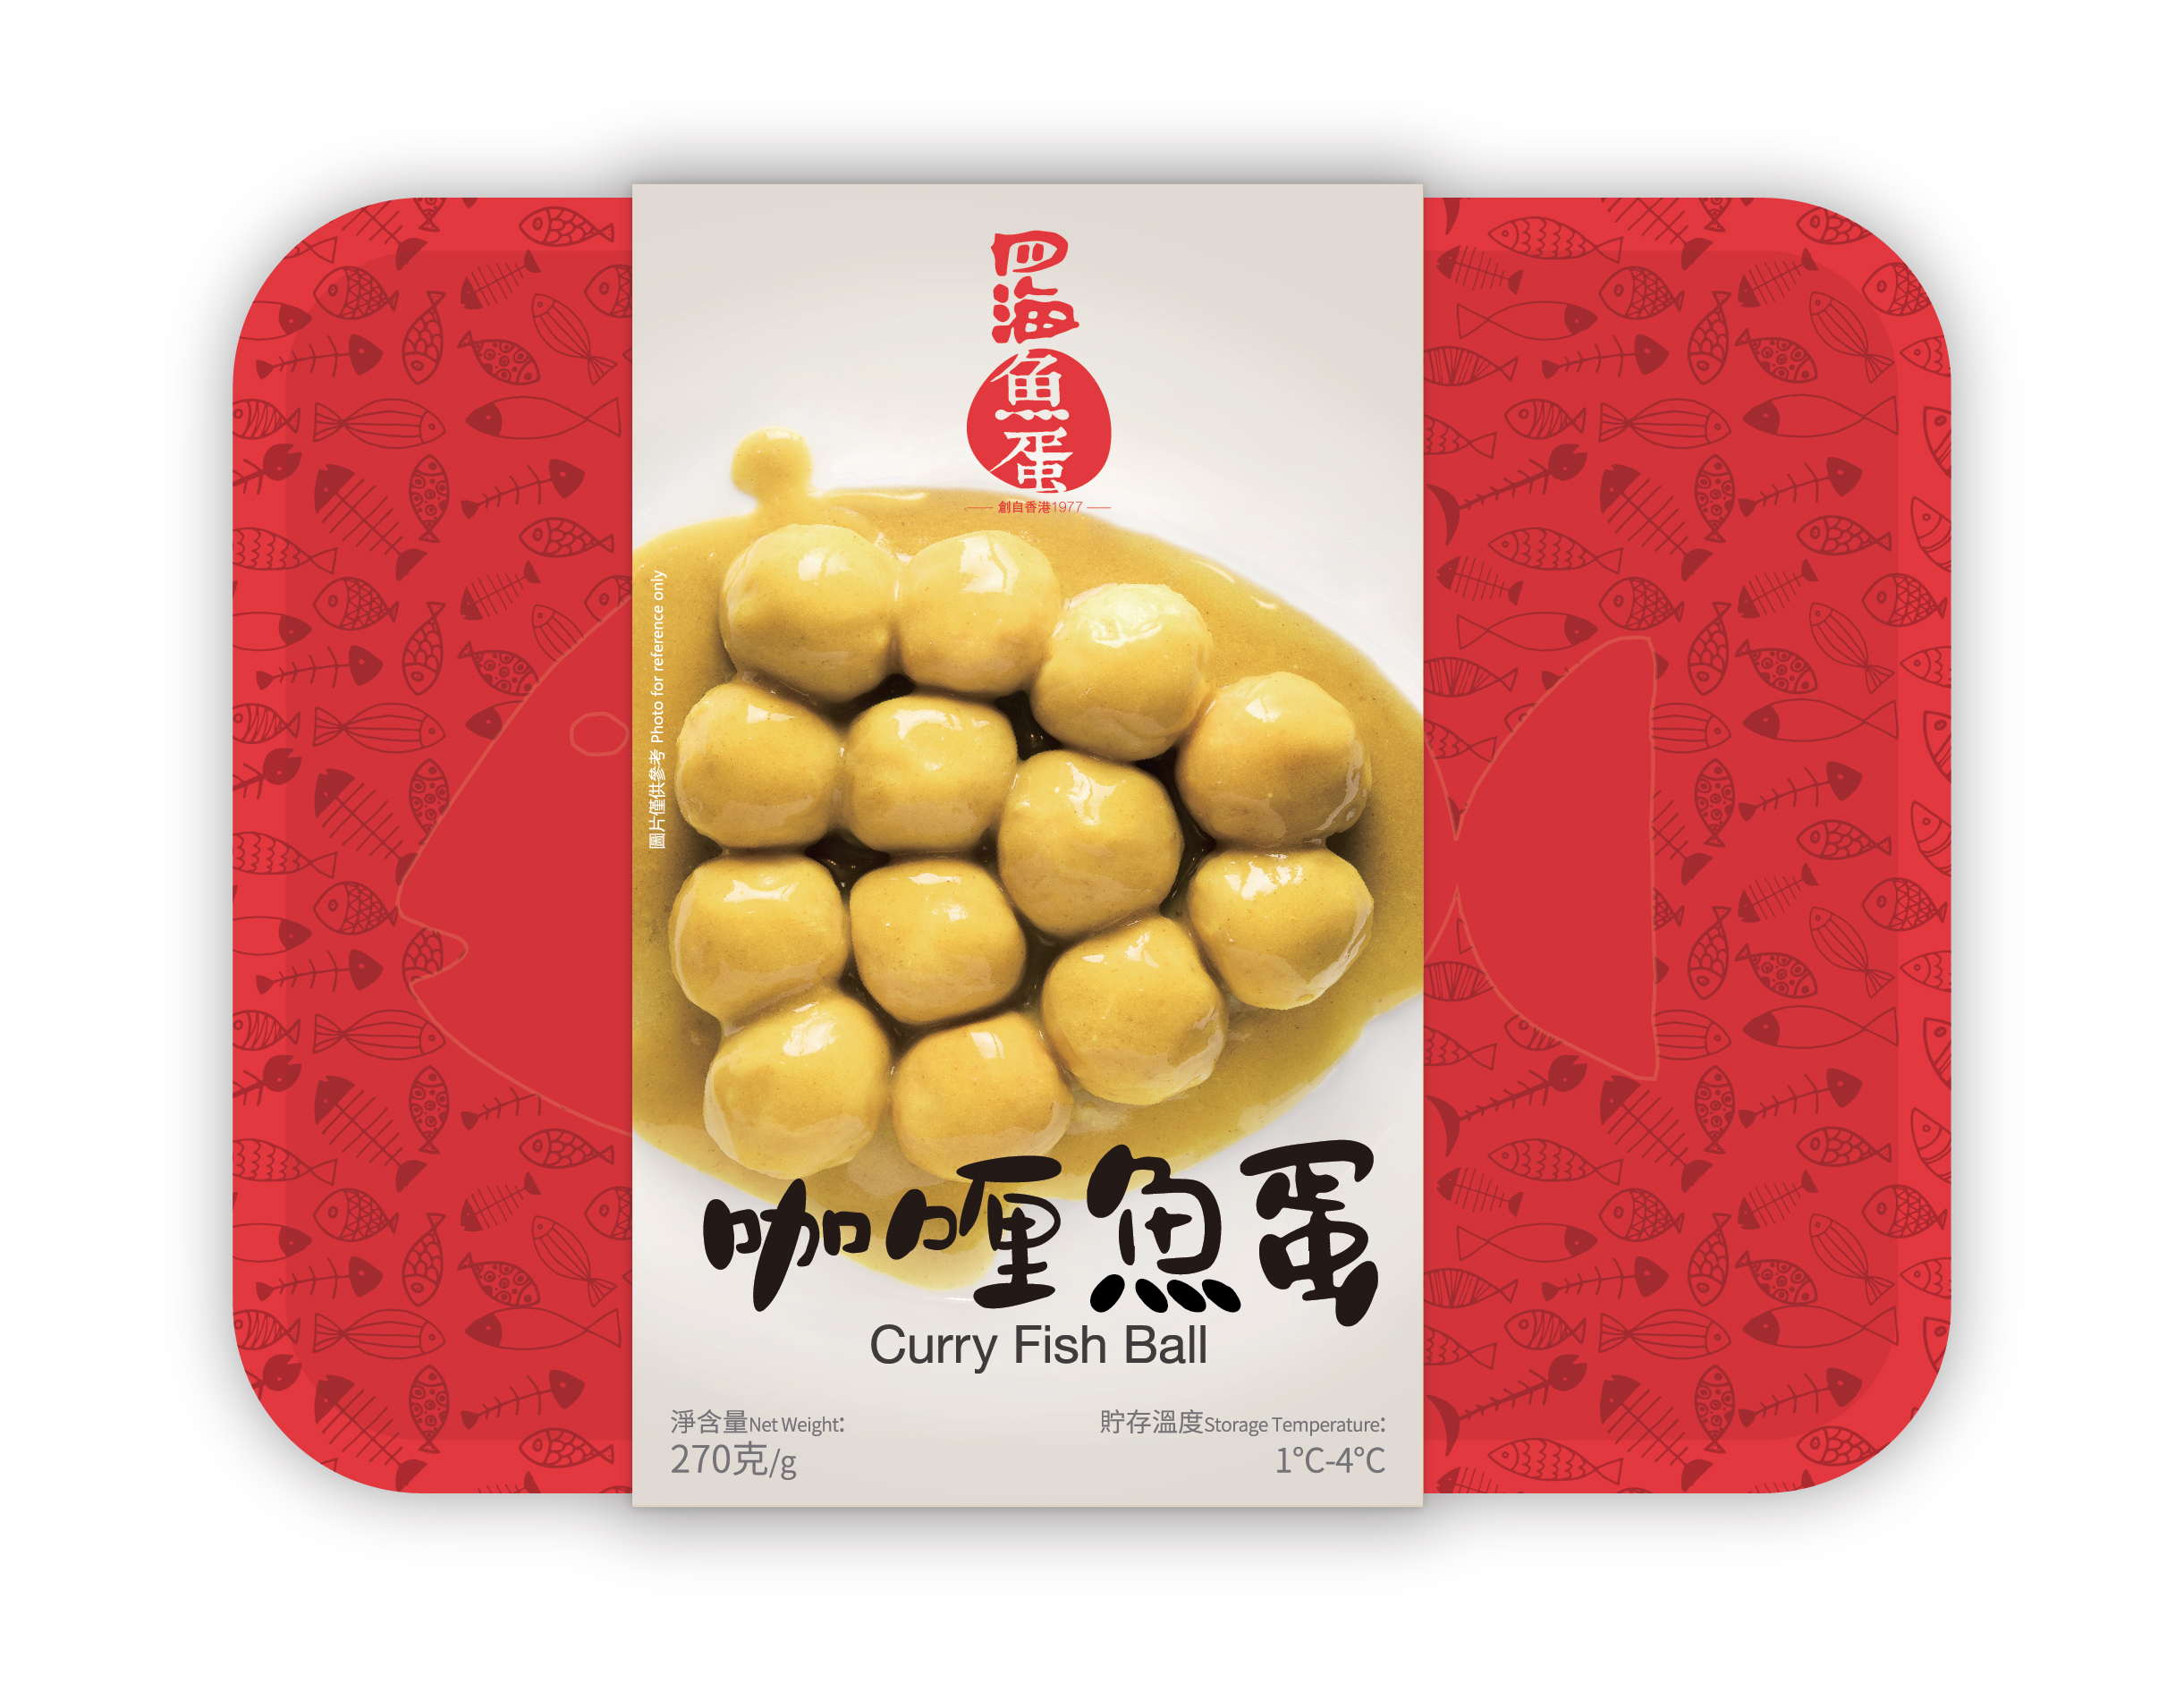 New package of curry fish balls, online exclusive!